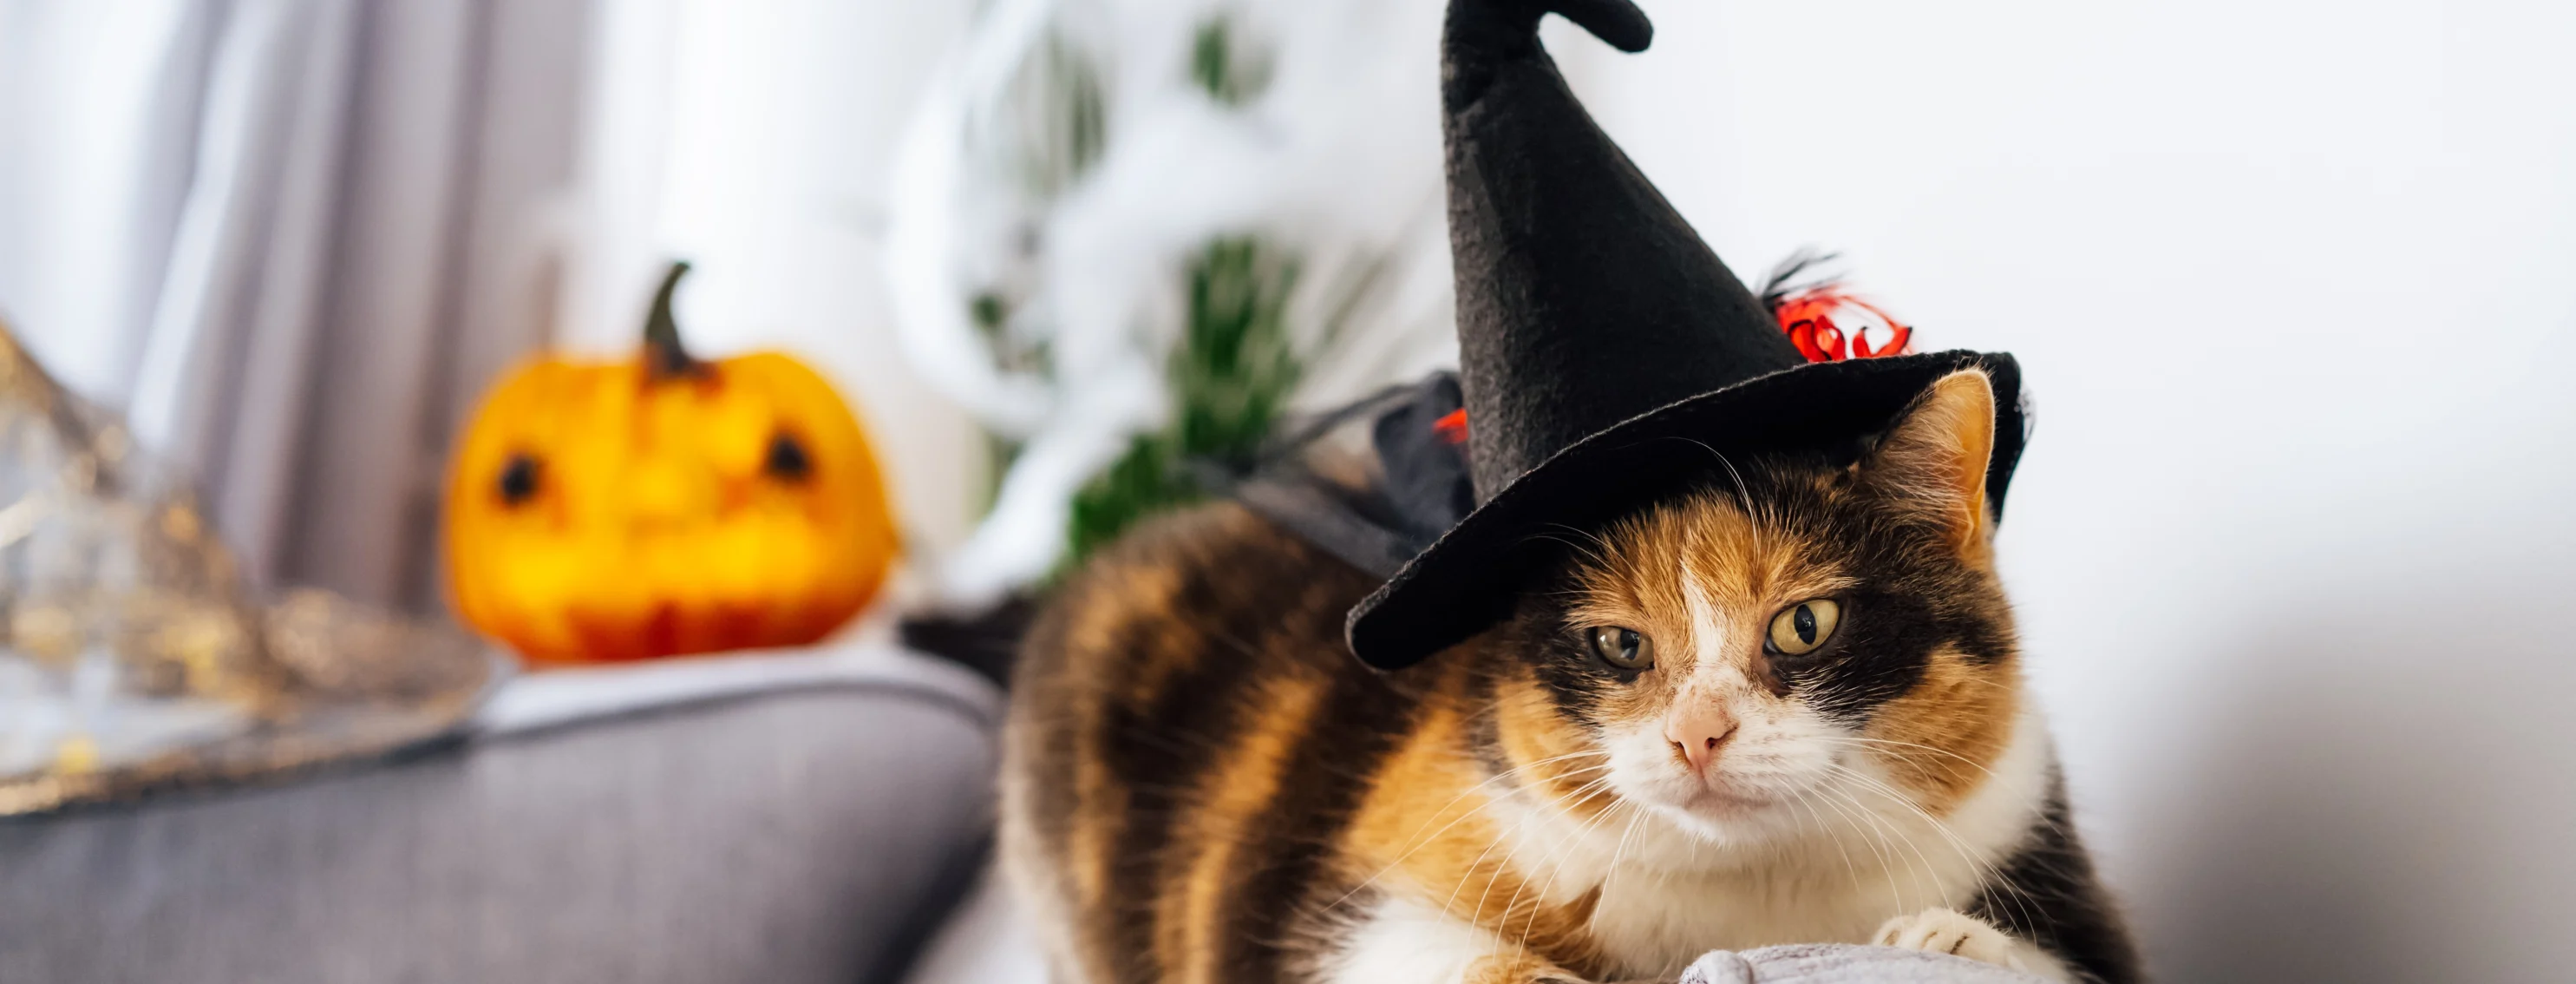 Cat sitting on couch with witch hat